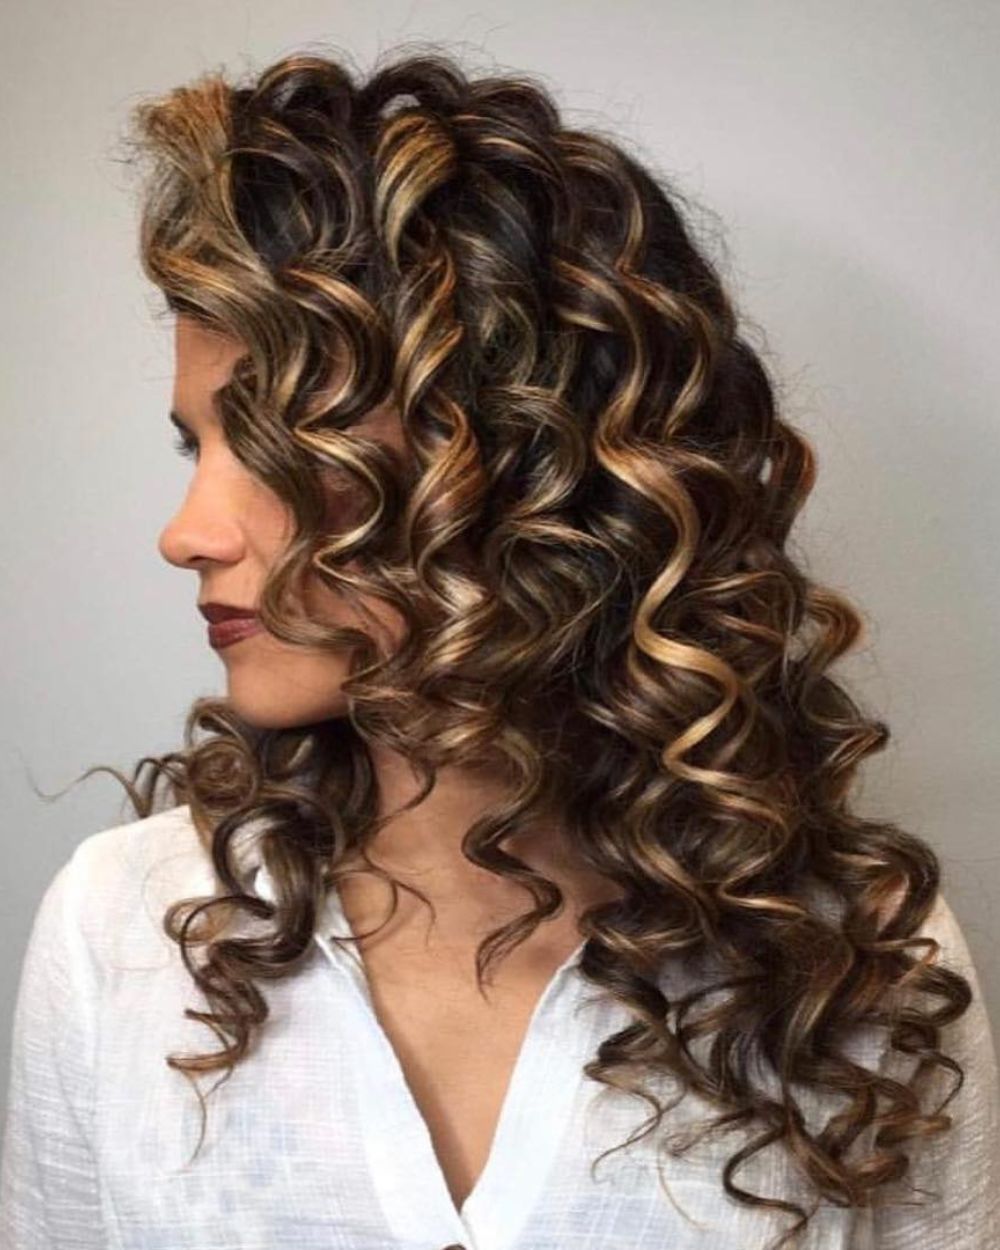 Thanksgiving hairstyles classic very curly hair